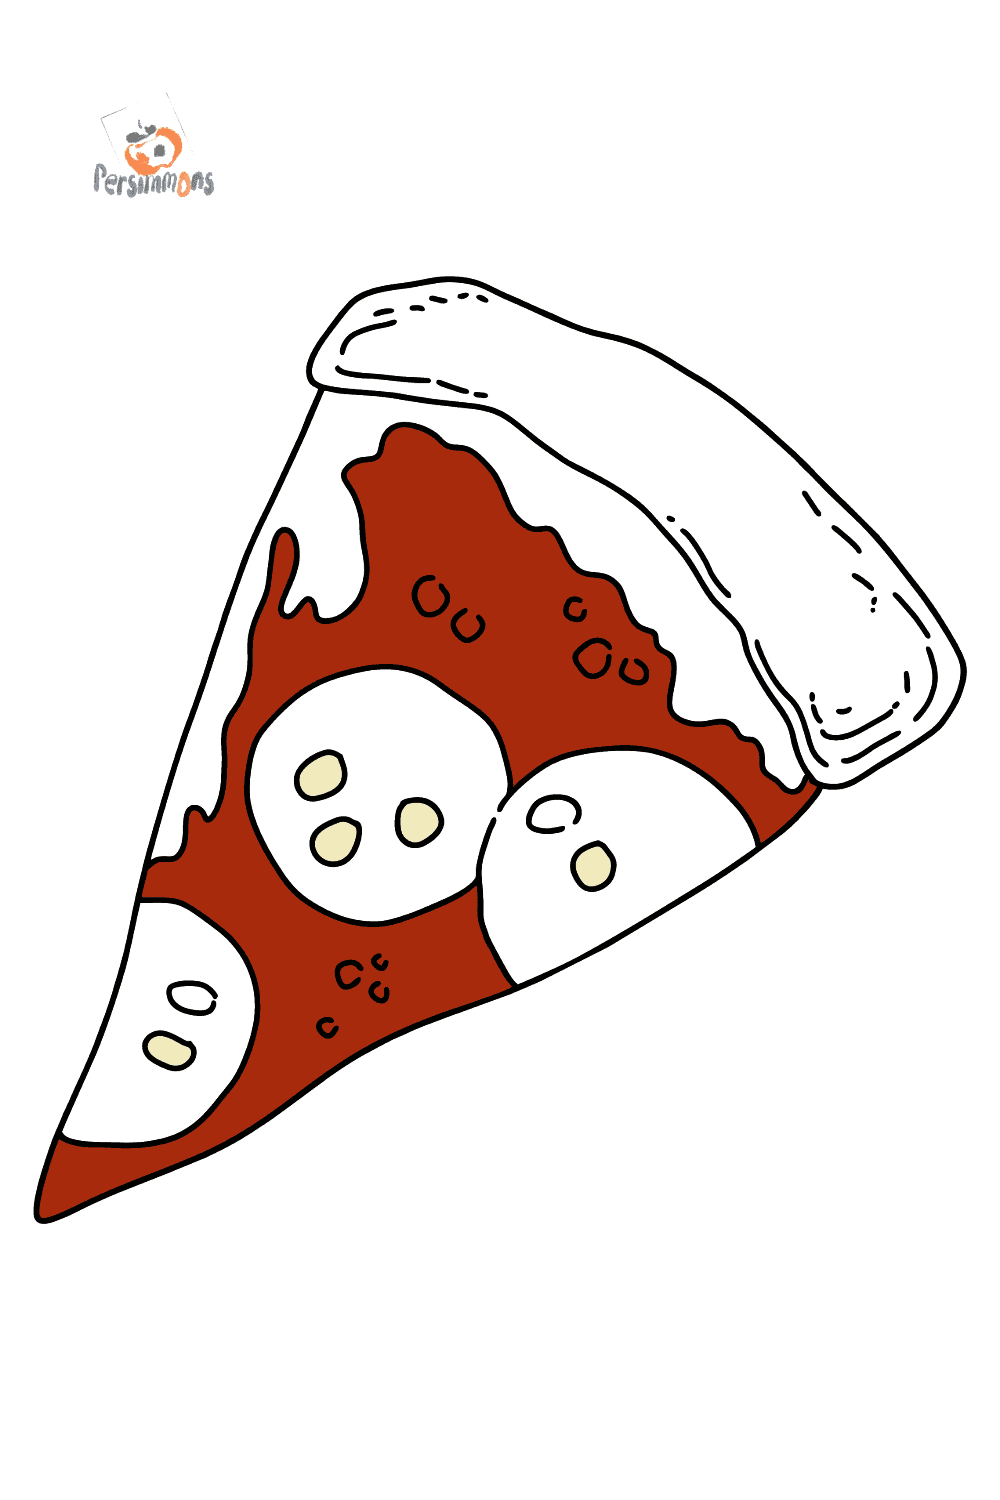 Pizza Drawing - How To Draw A Pizza Step By Step